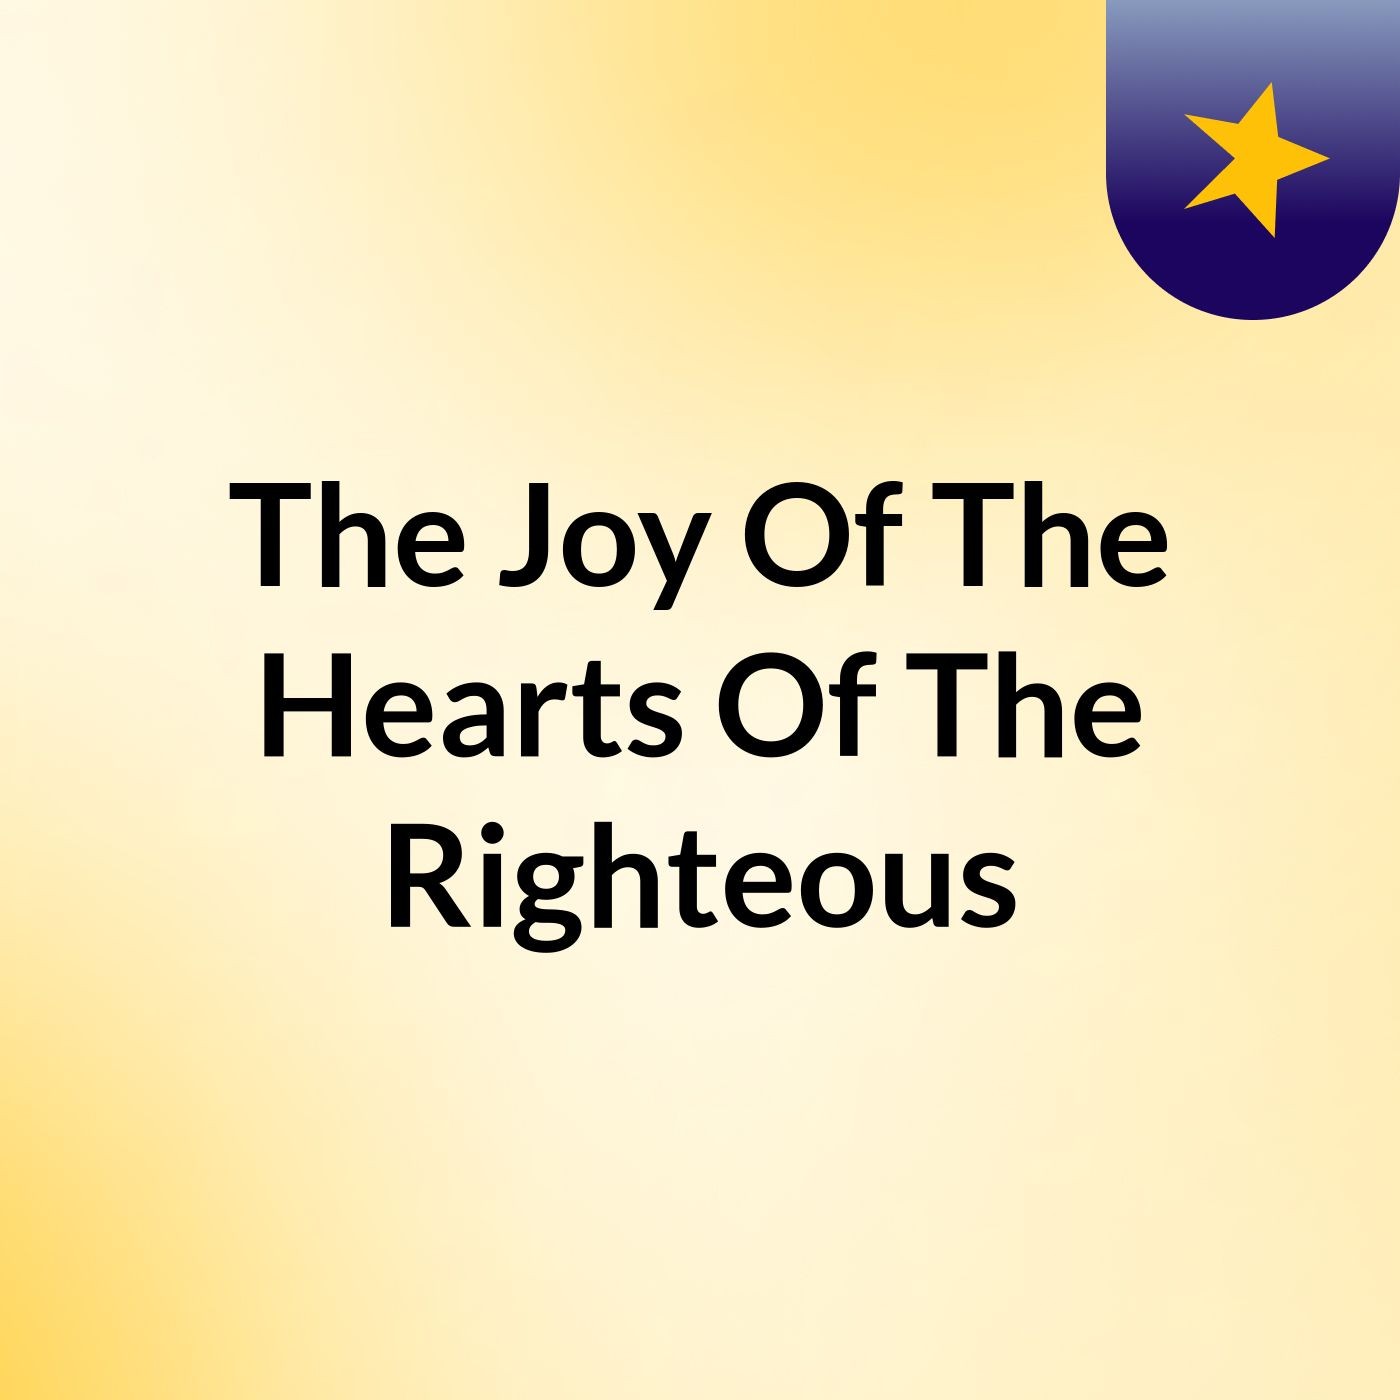 Episode 14 - The Joy Of The Hearts Of The Righteous